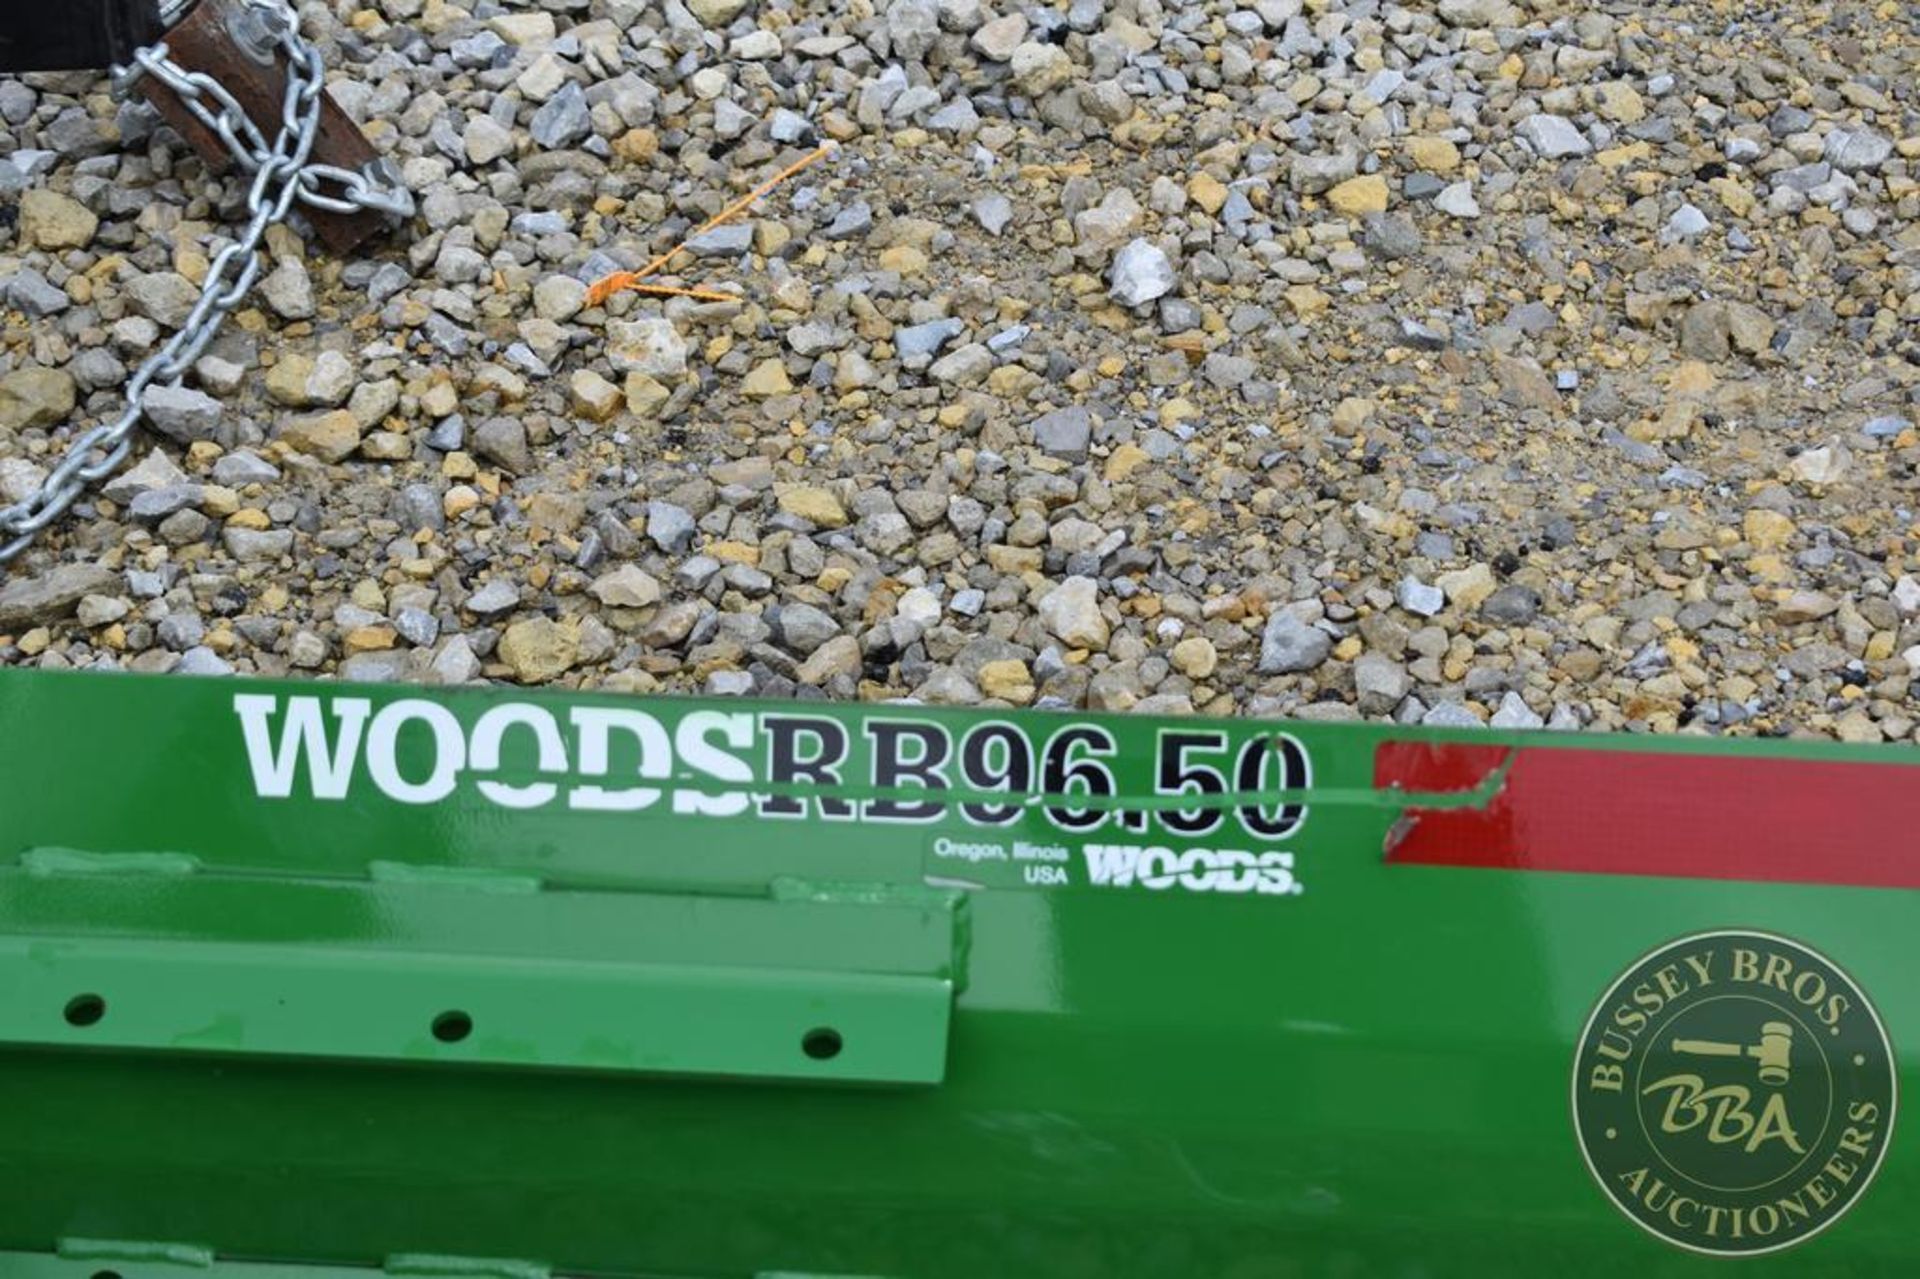 WOODS RB96.50 26094 - Image 11 of 13